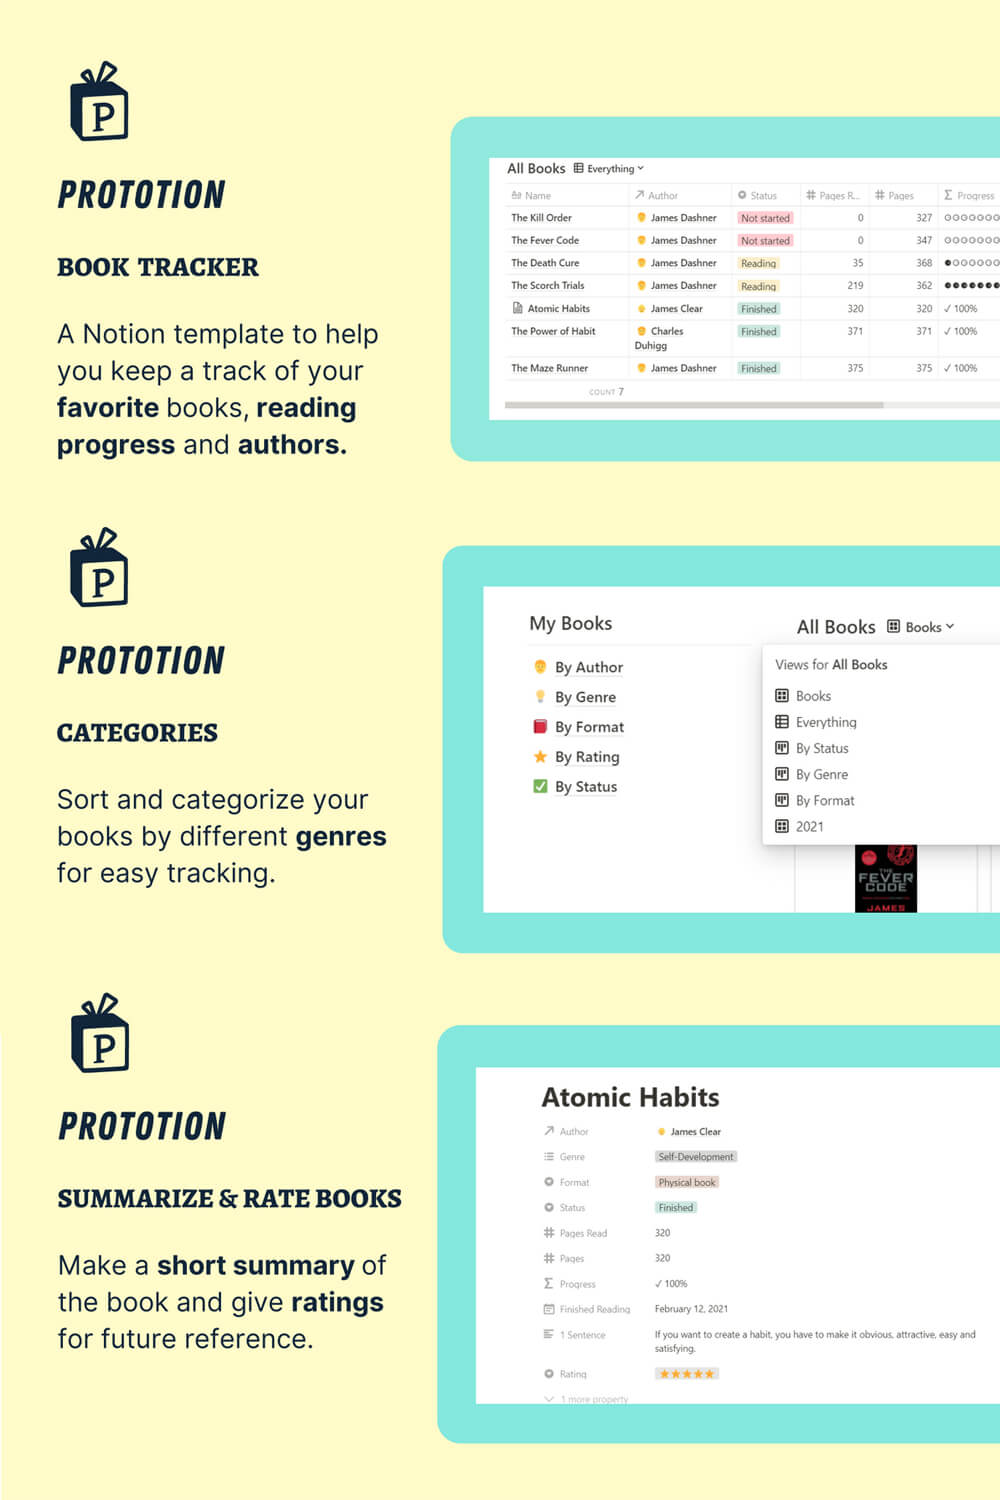 A Notion template to help you keep a track of your favorit books, reading progress and authors.